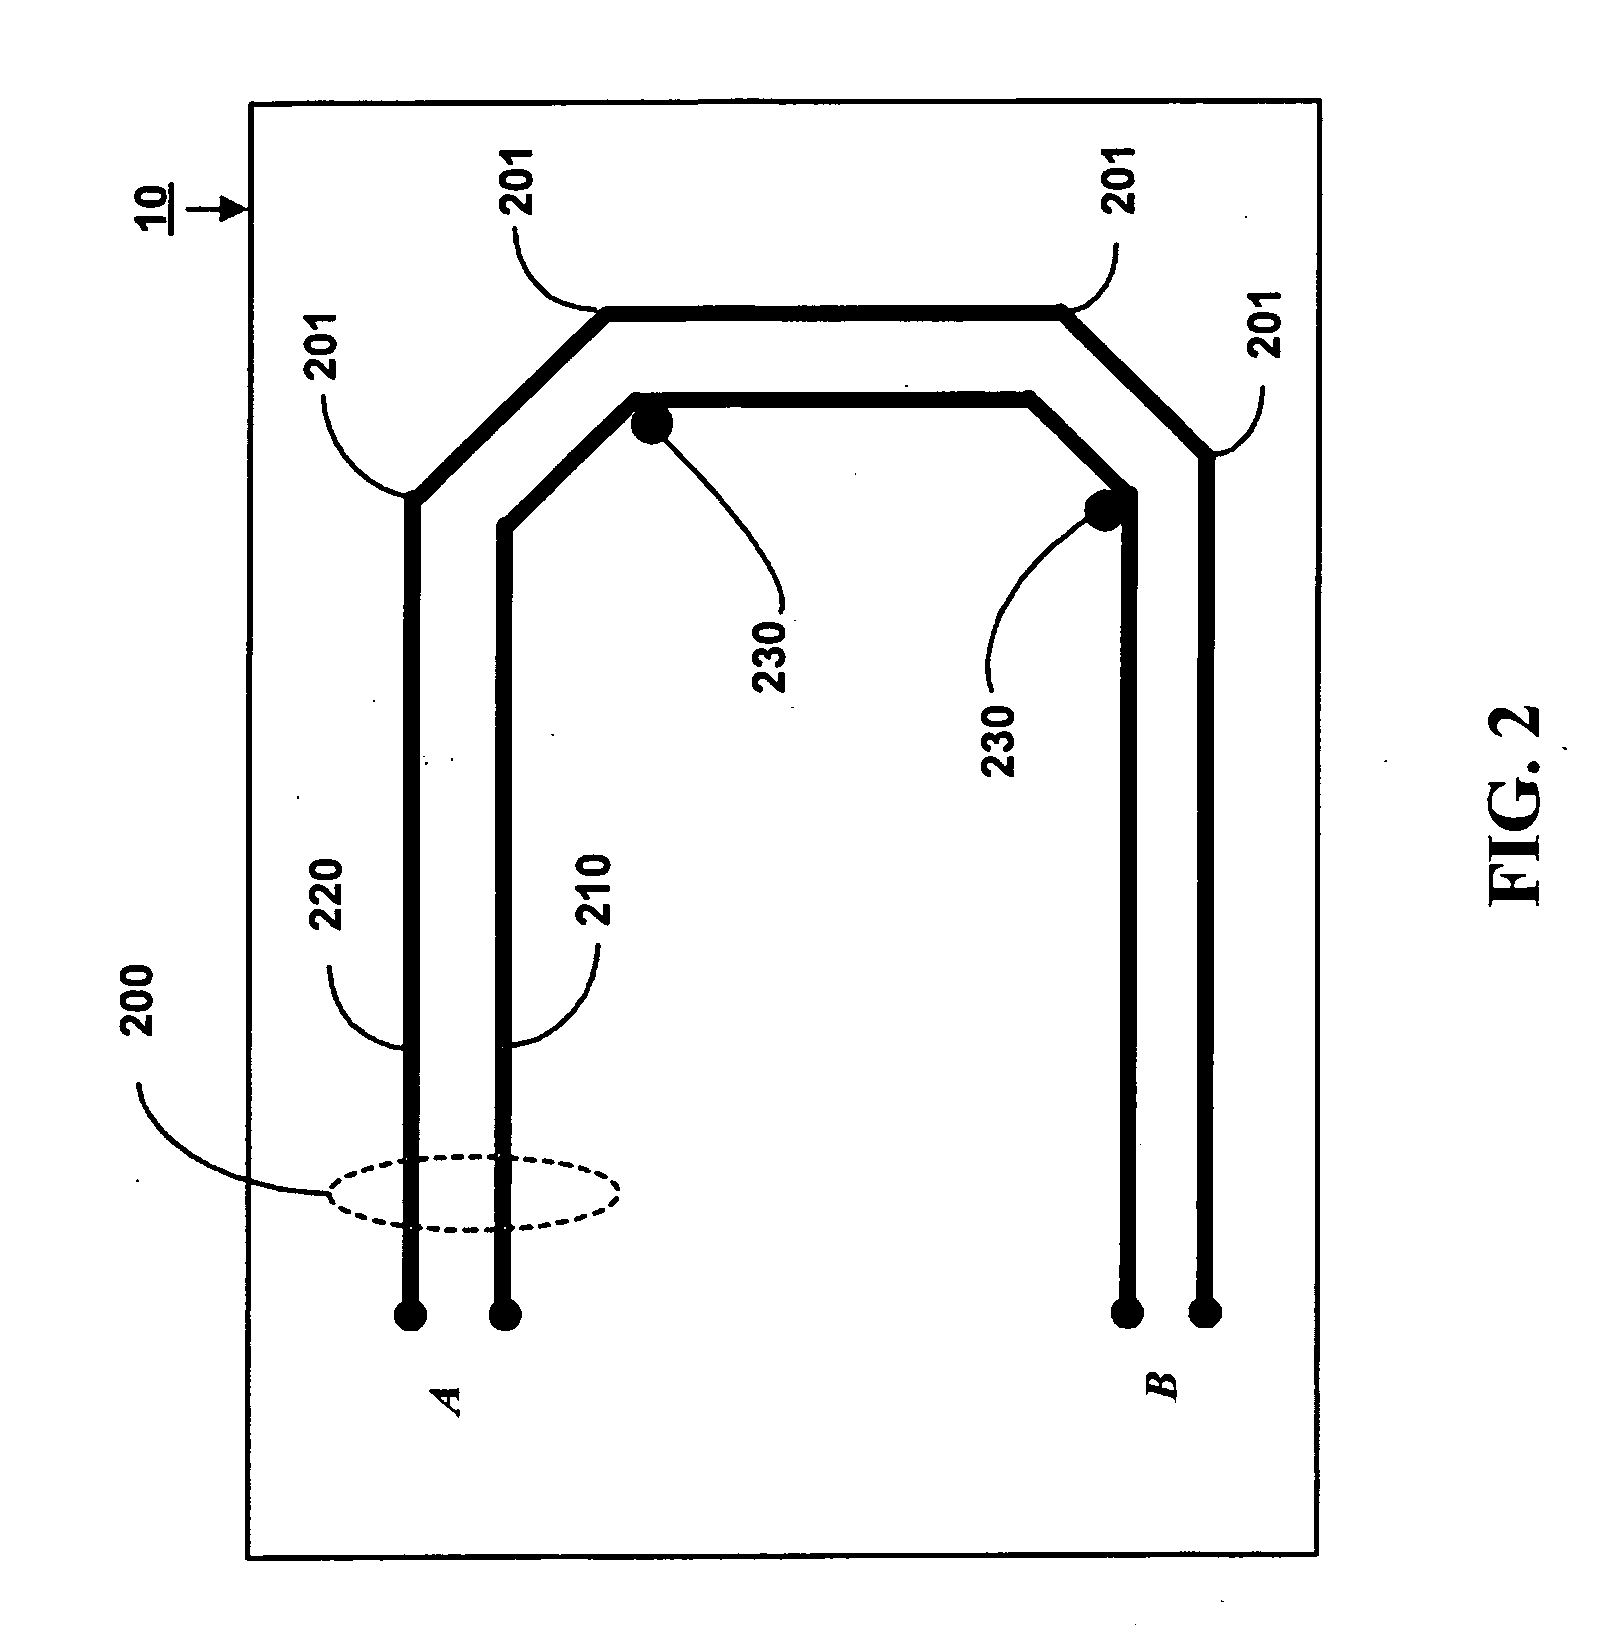 Capacitance-compensated differential circuit line layout structure